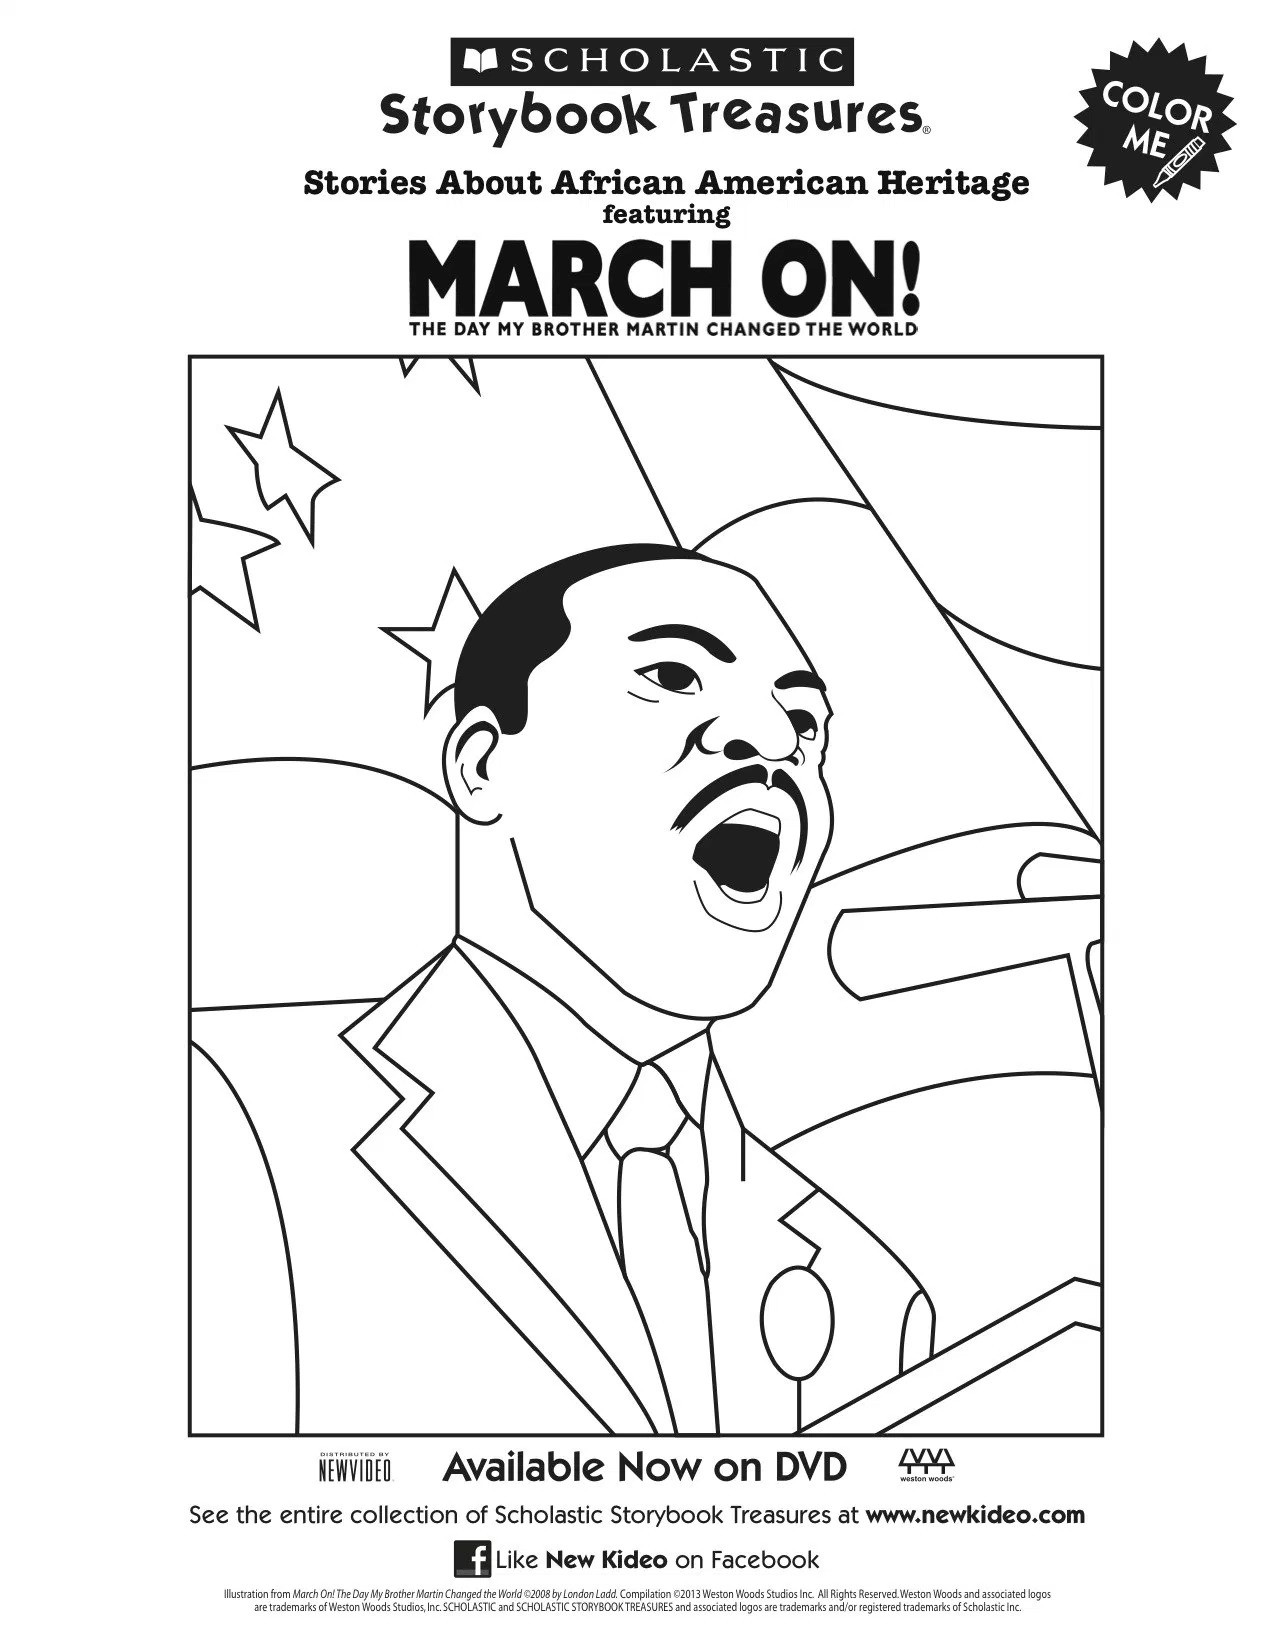 Martin Luther King Jr. Day Coloring Sheets Coloring Pages